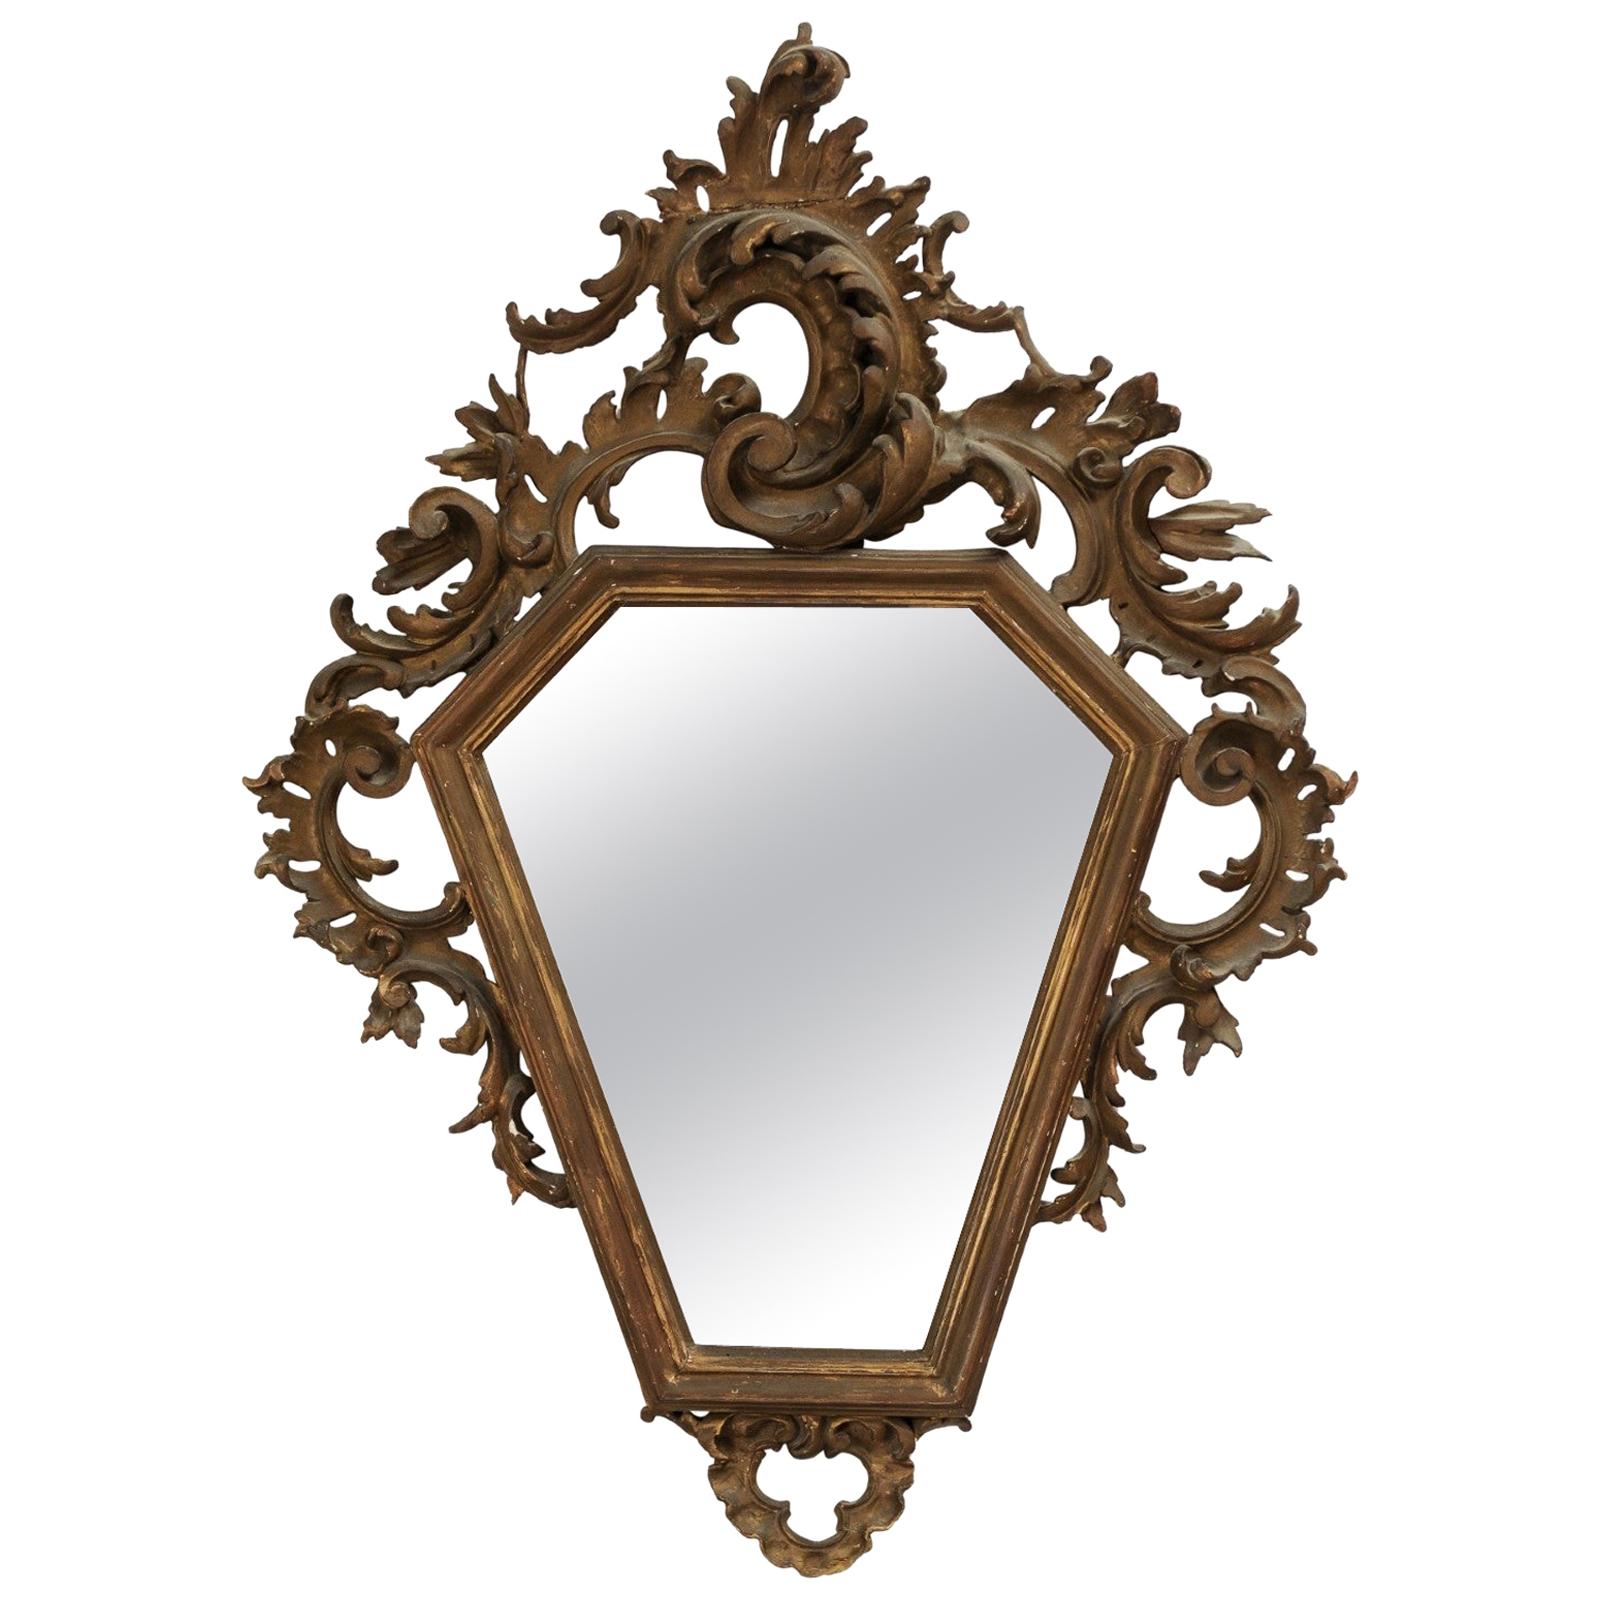 Italian 19th Century Rococo Style Carved Mirror with Traces of Gilt and Scrolls For Sale